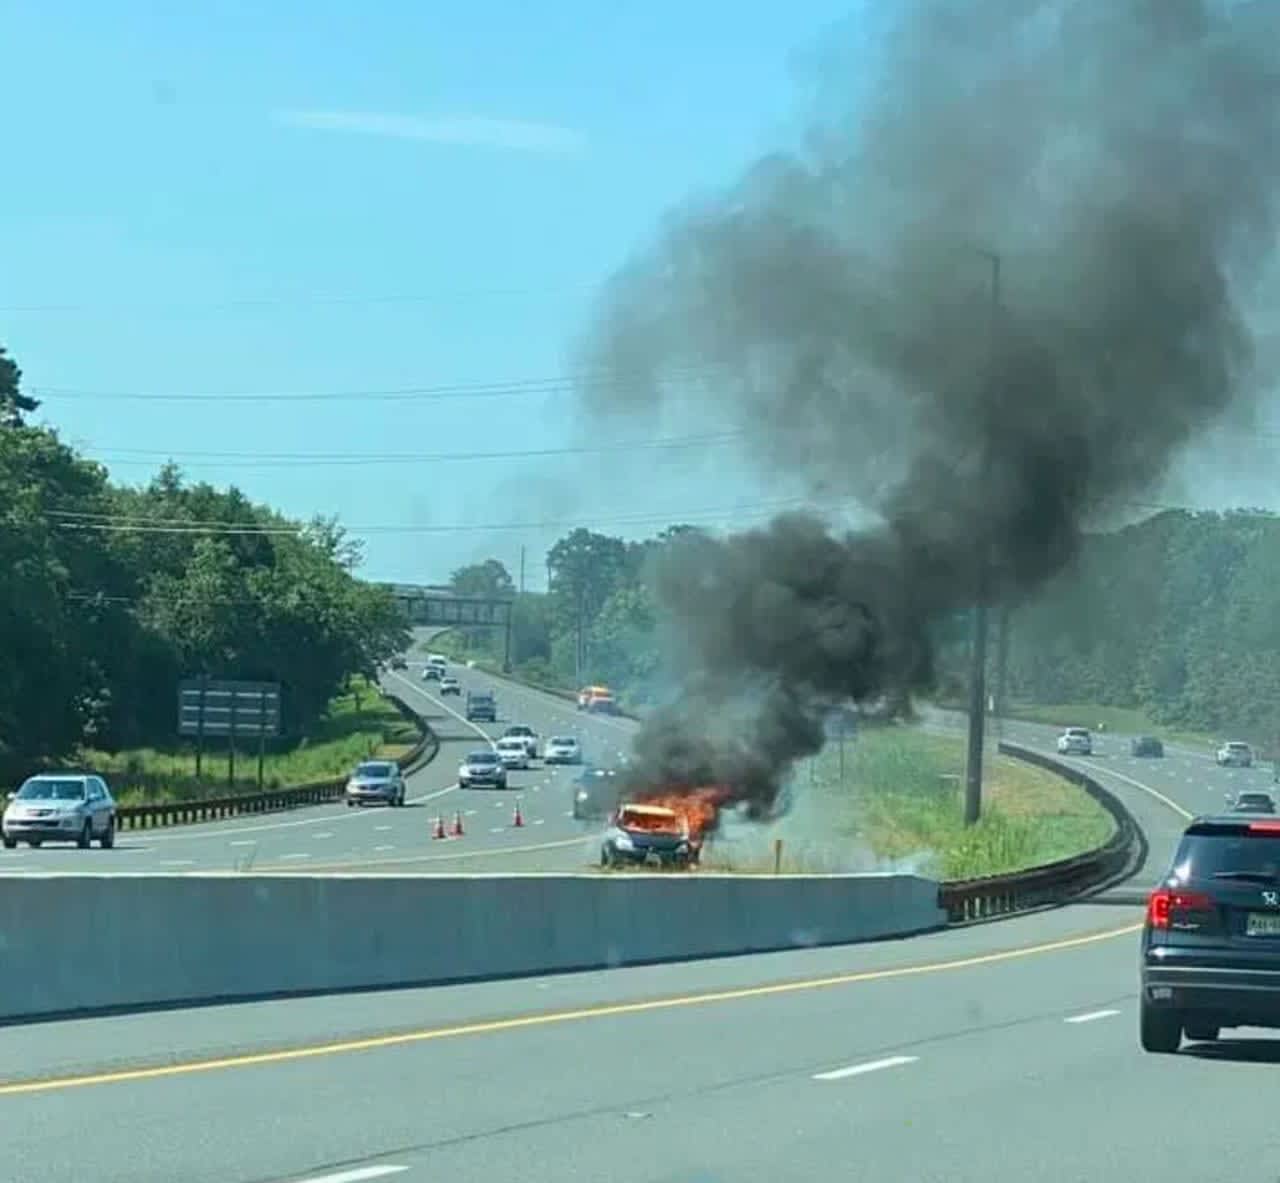 The scene of a fatal crash on the Garden State Parkway on Tuesday in Atlantic County. (Photo by Breaking AC @ https://www.facebook.com/breakingAC/)